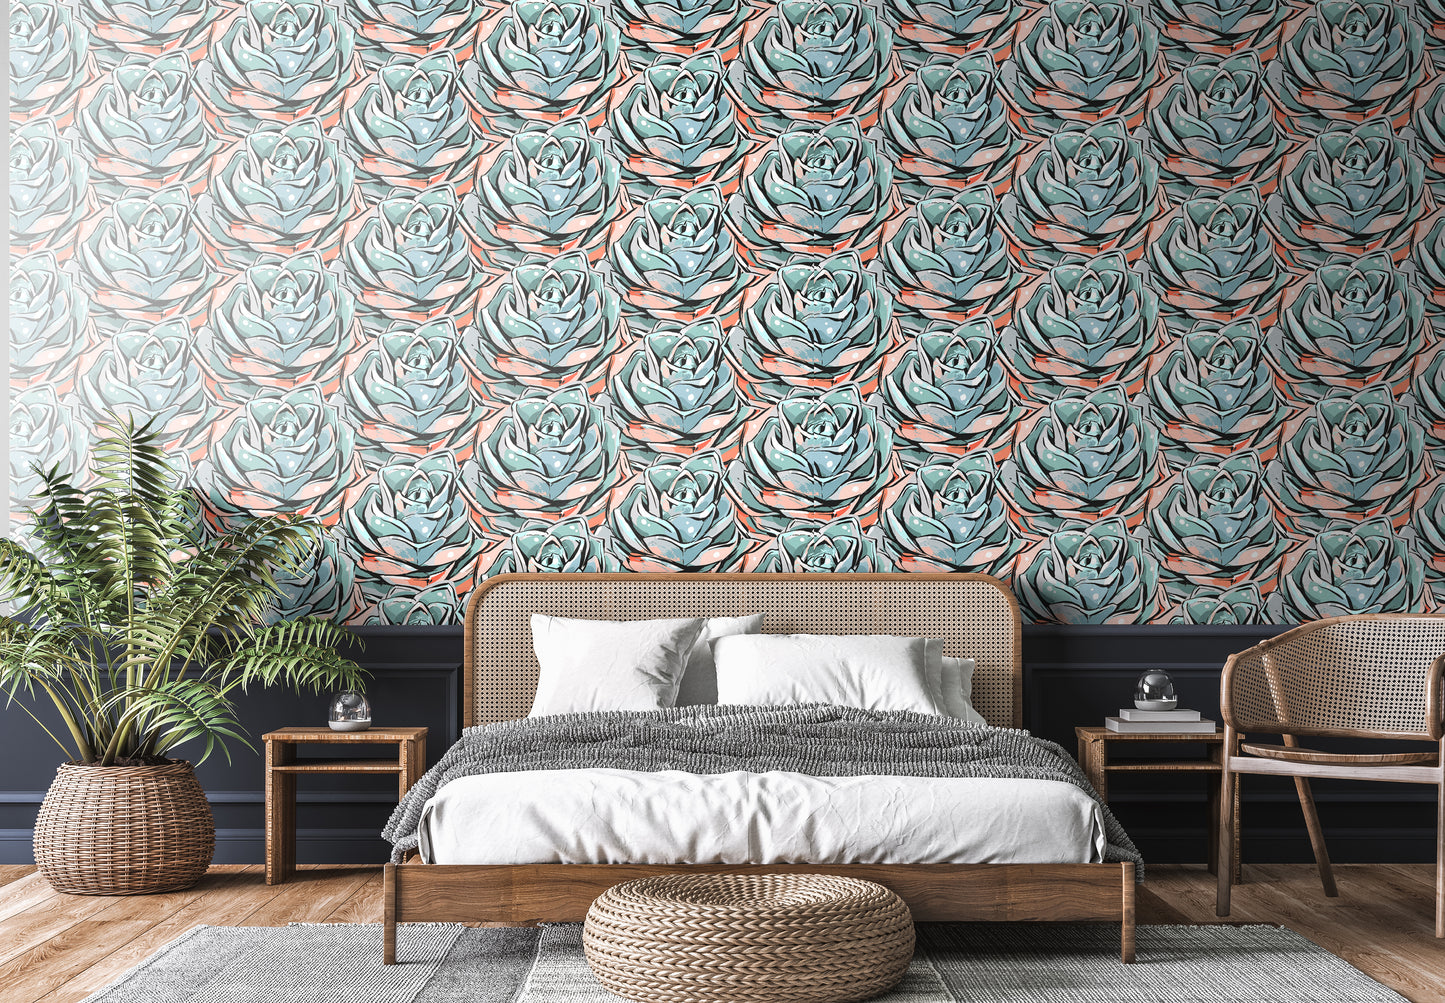 Sweet Succulent Removable Peel And Stick Wallpaper